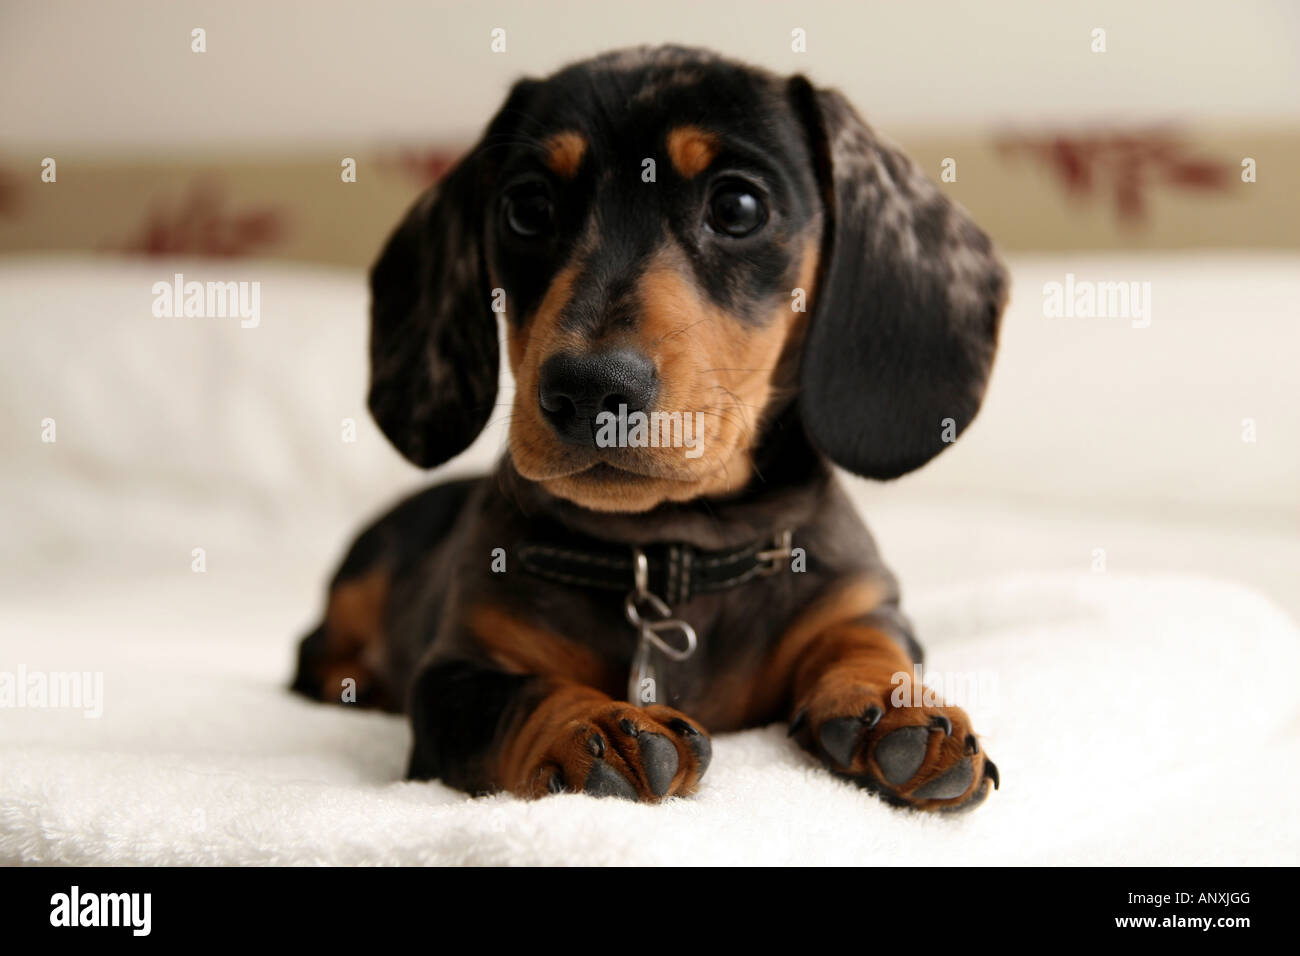 Miniature Dachshund puppy on bed Stock Photo